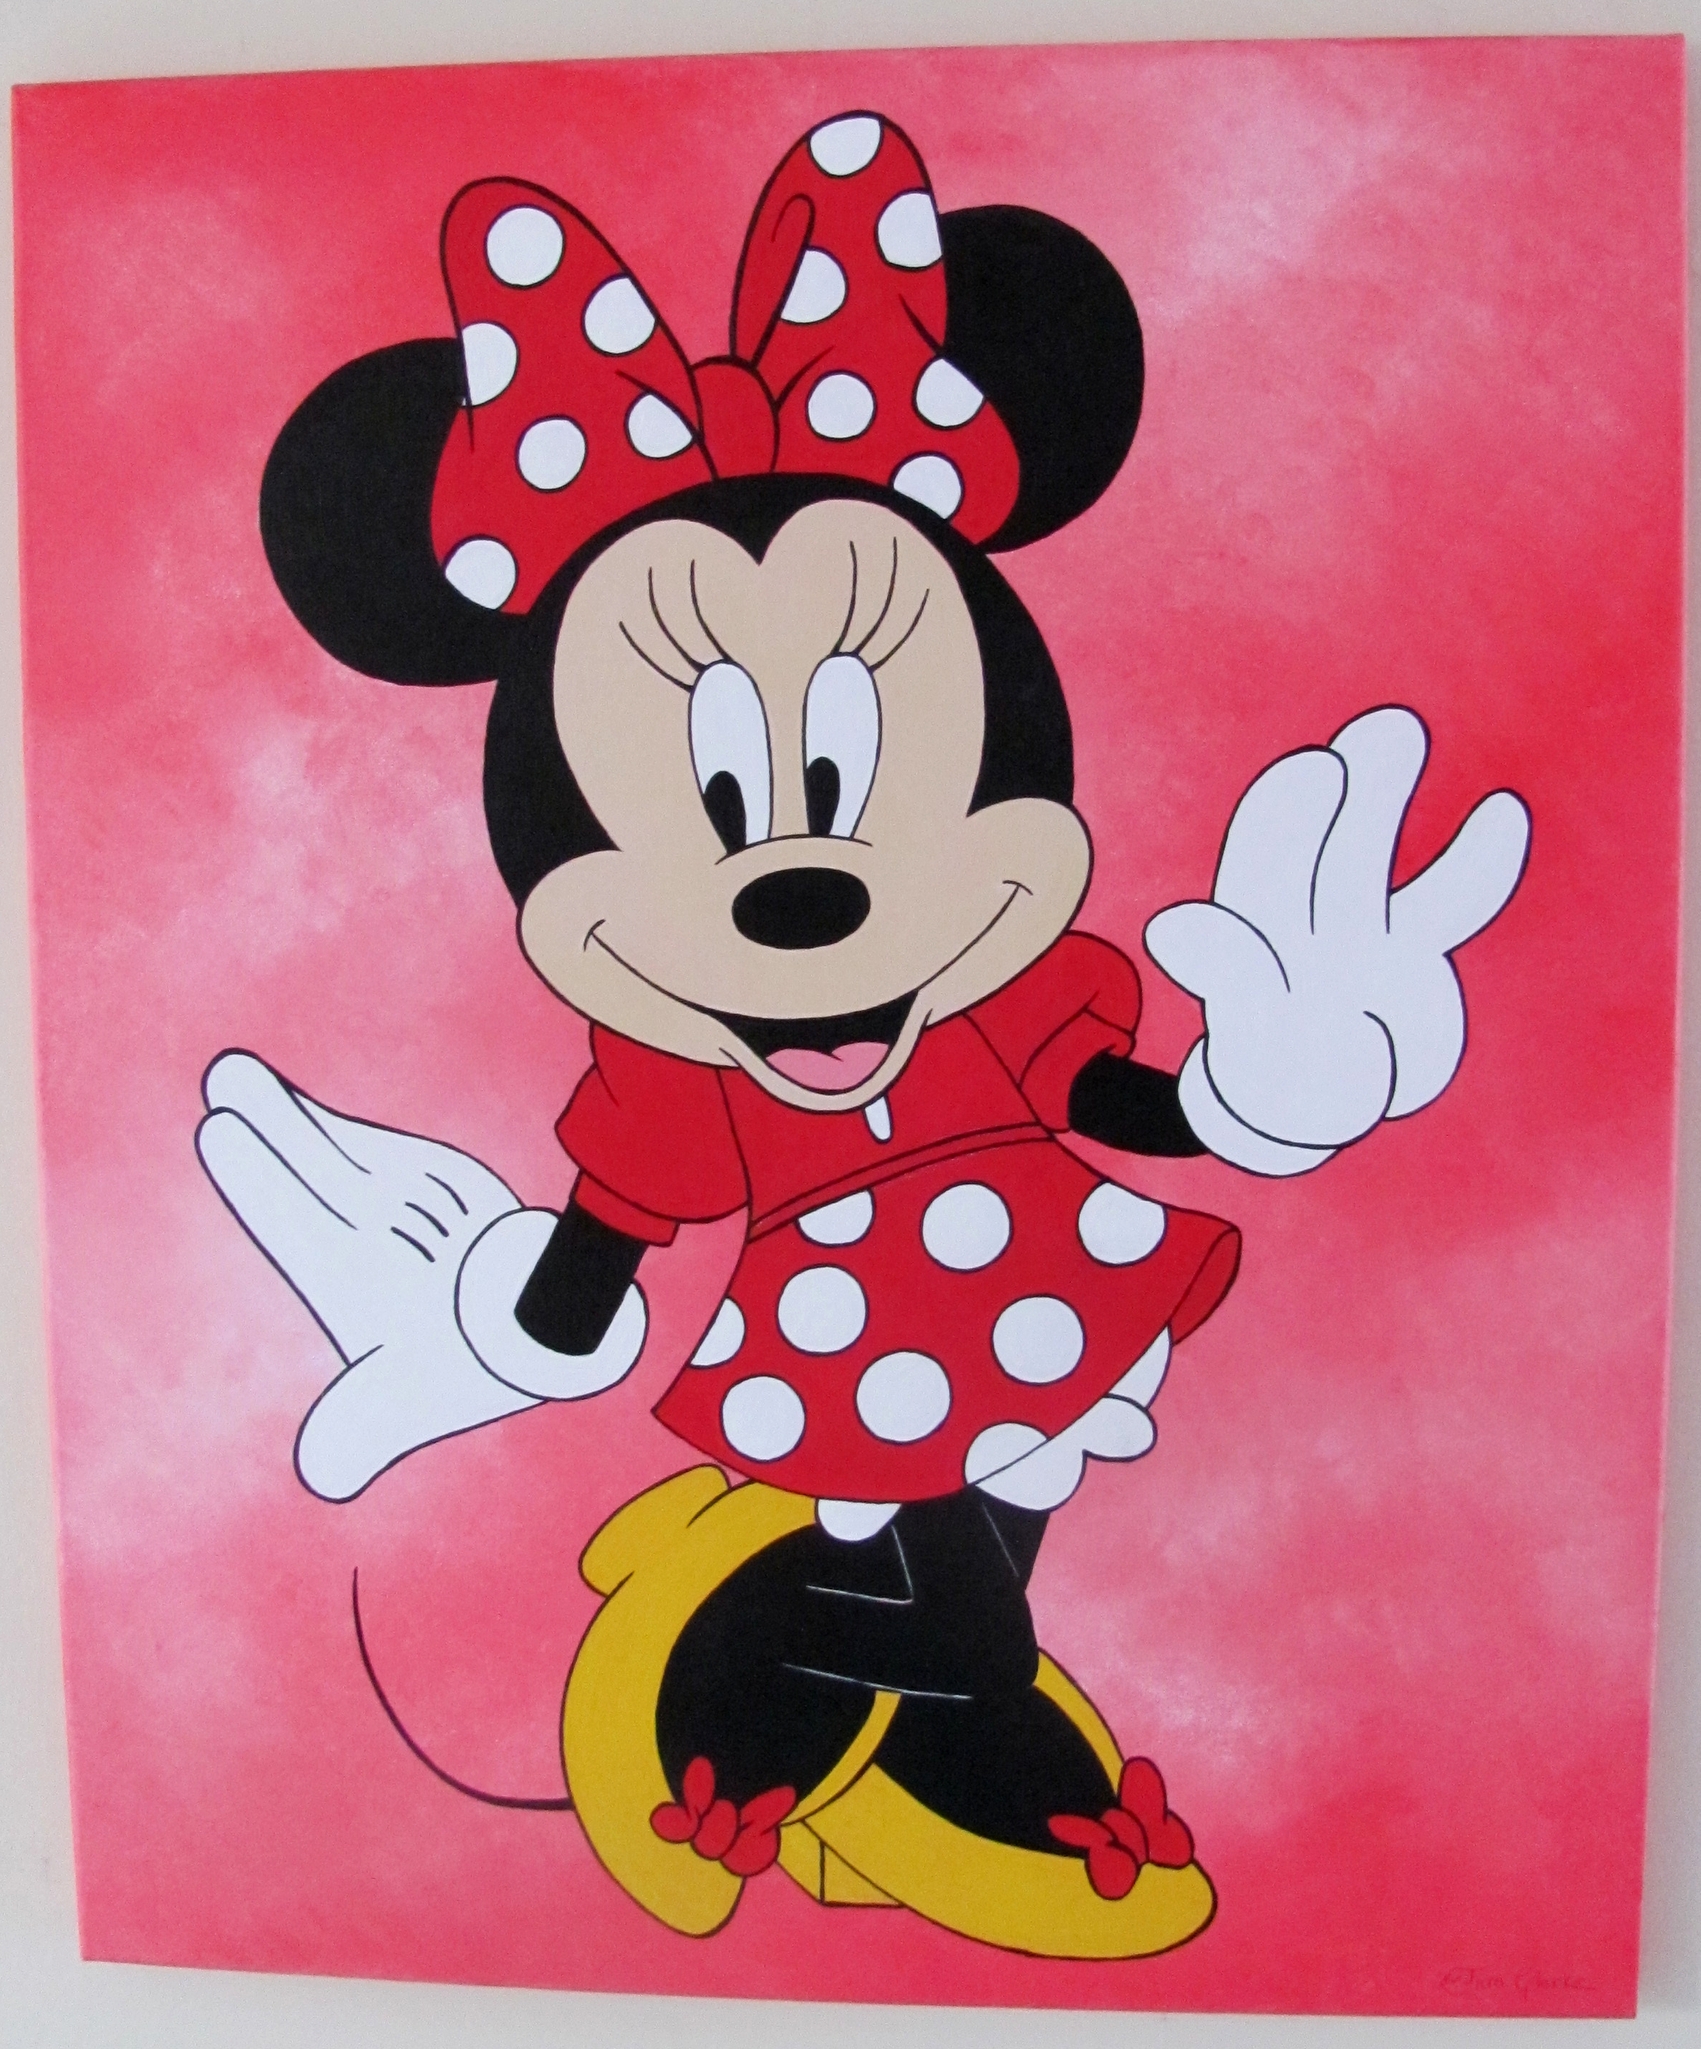 Clip Arts Related To : minnie mouse. view all Imagenes De Mini Mouse). 